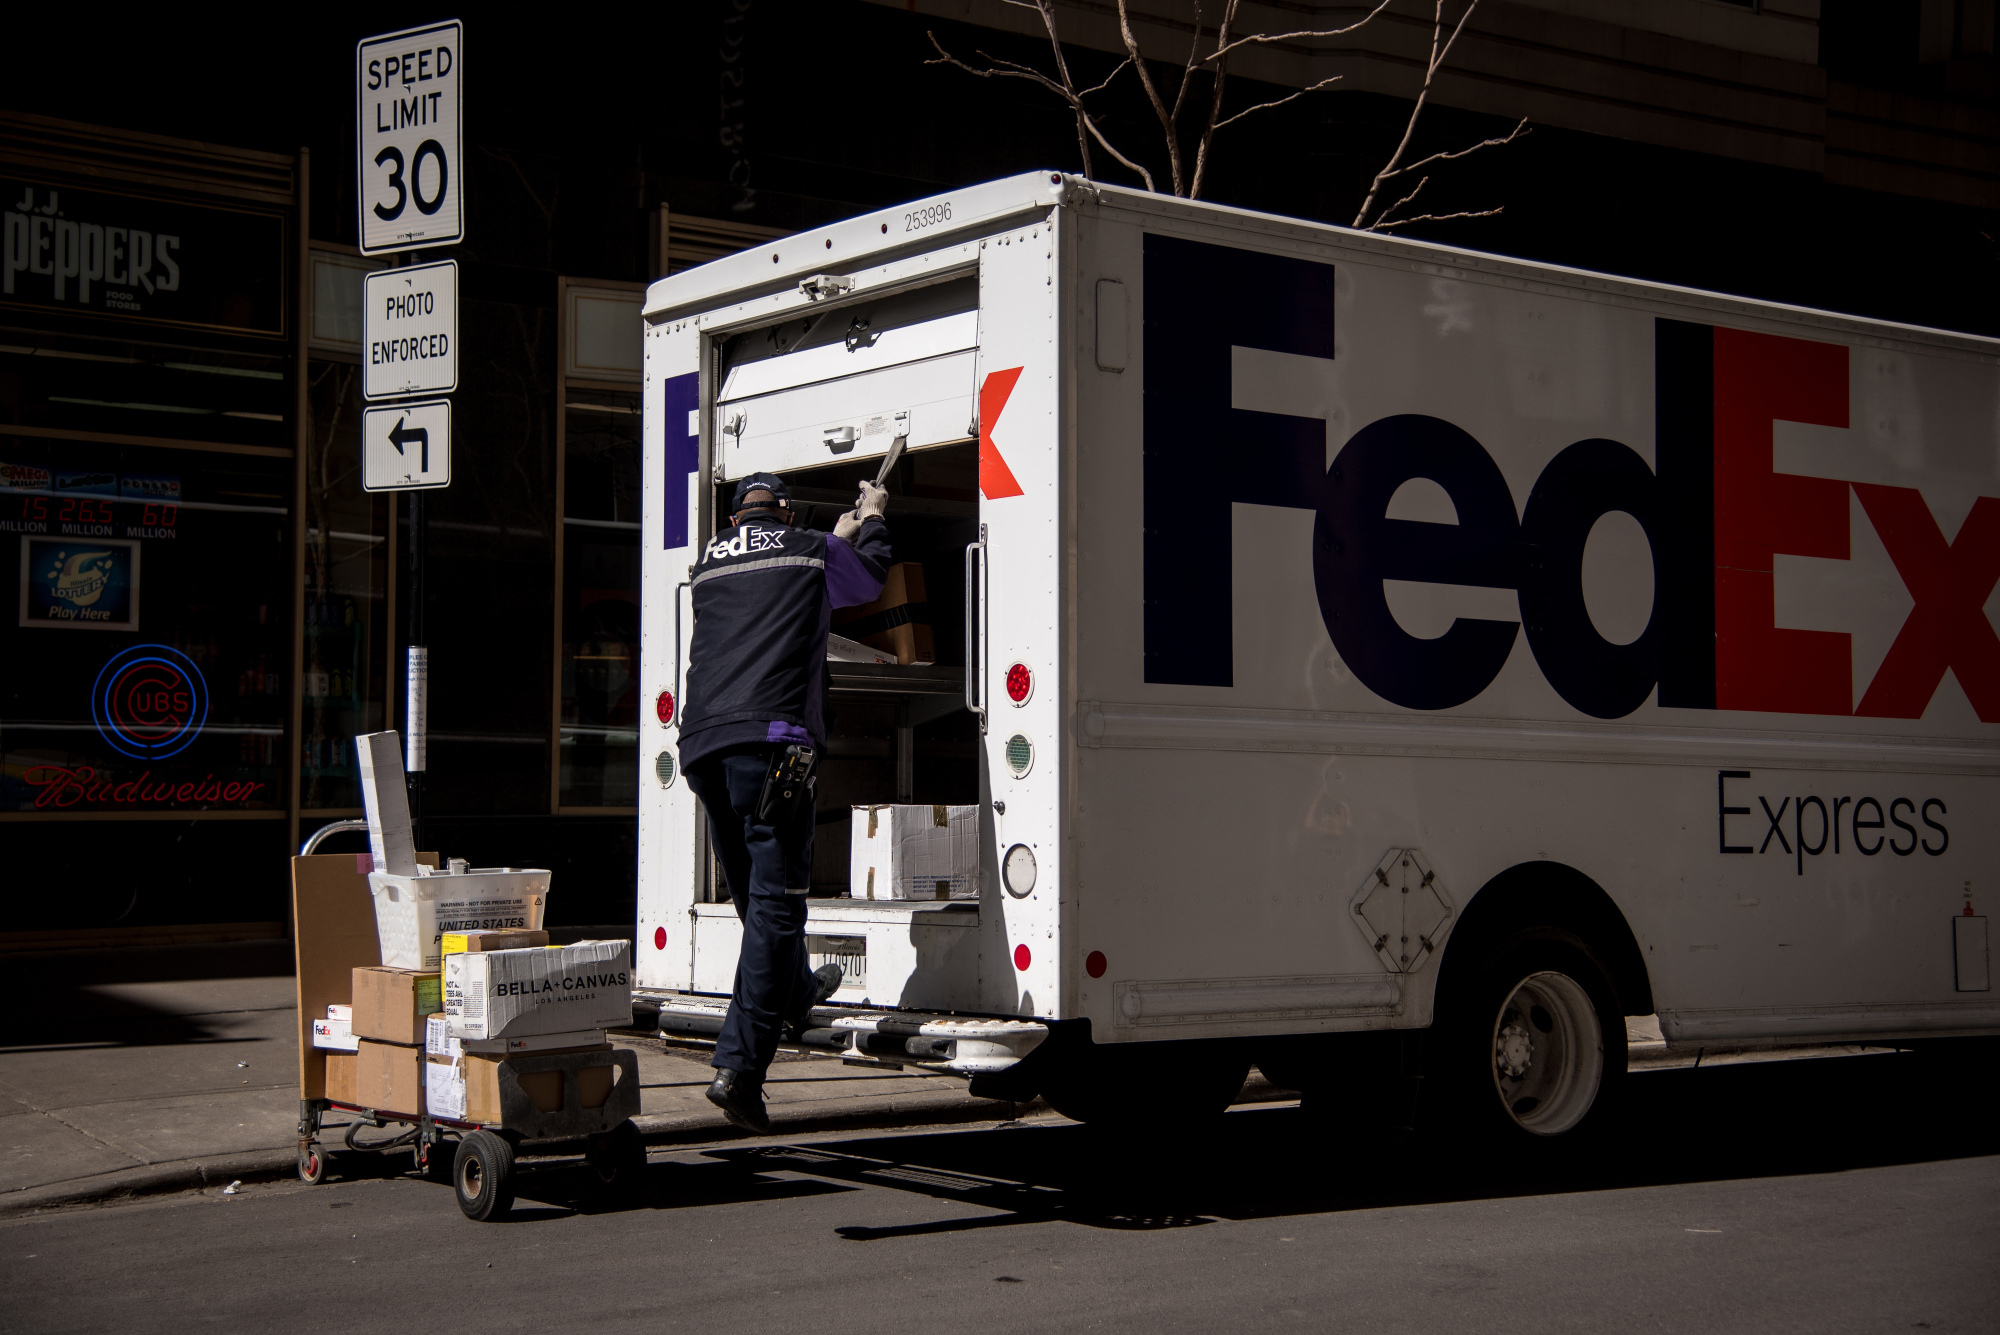 fedex delivery by end of day